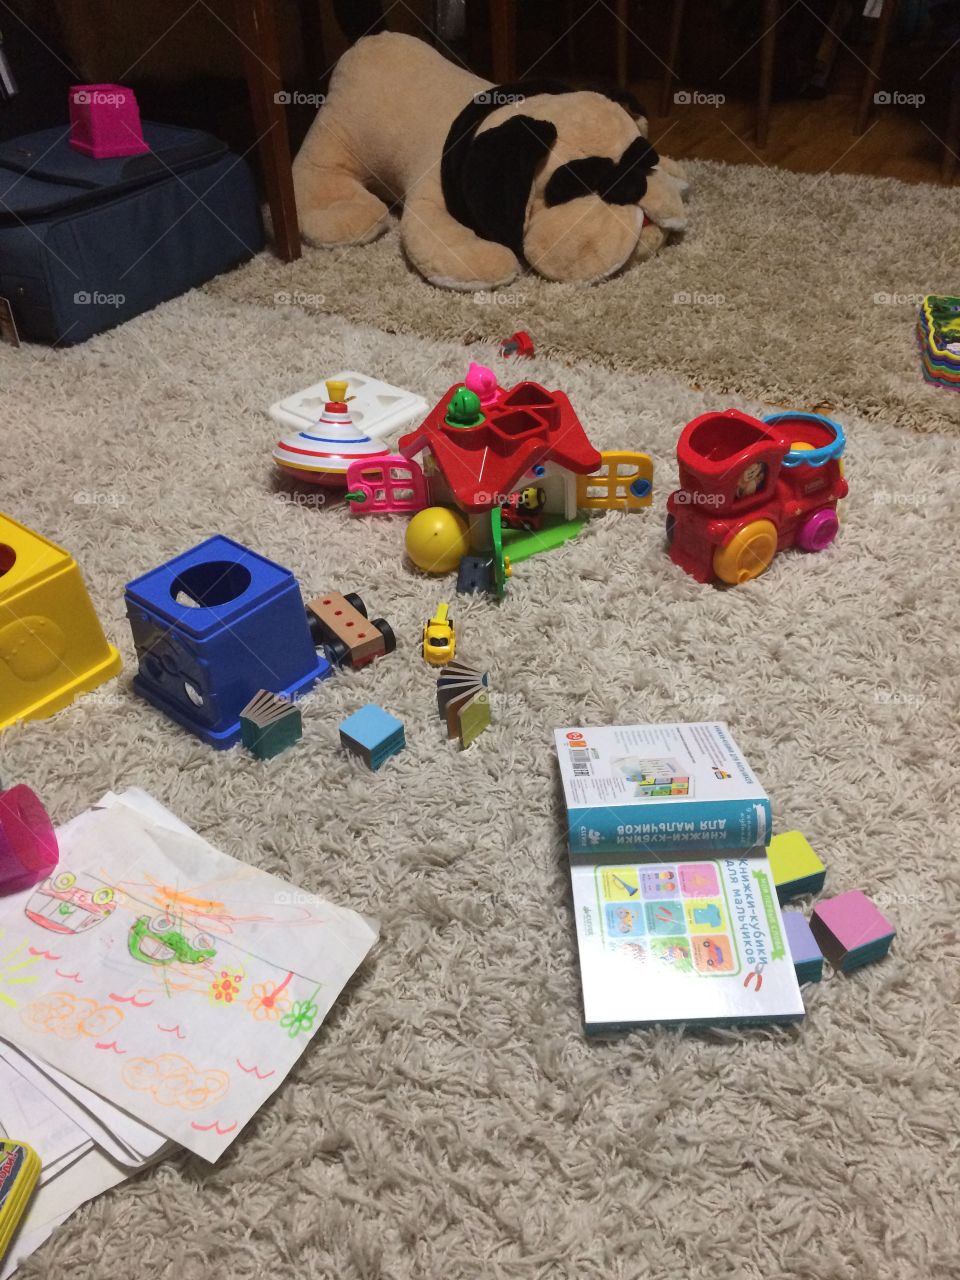 Toys in a room